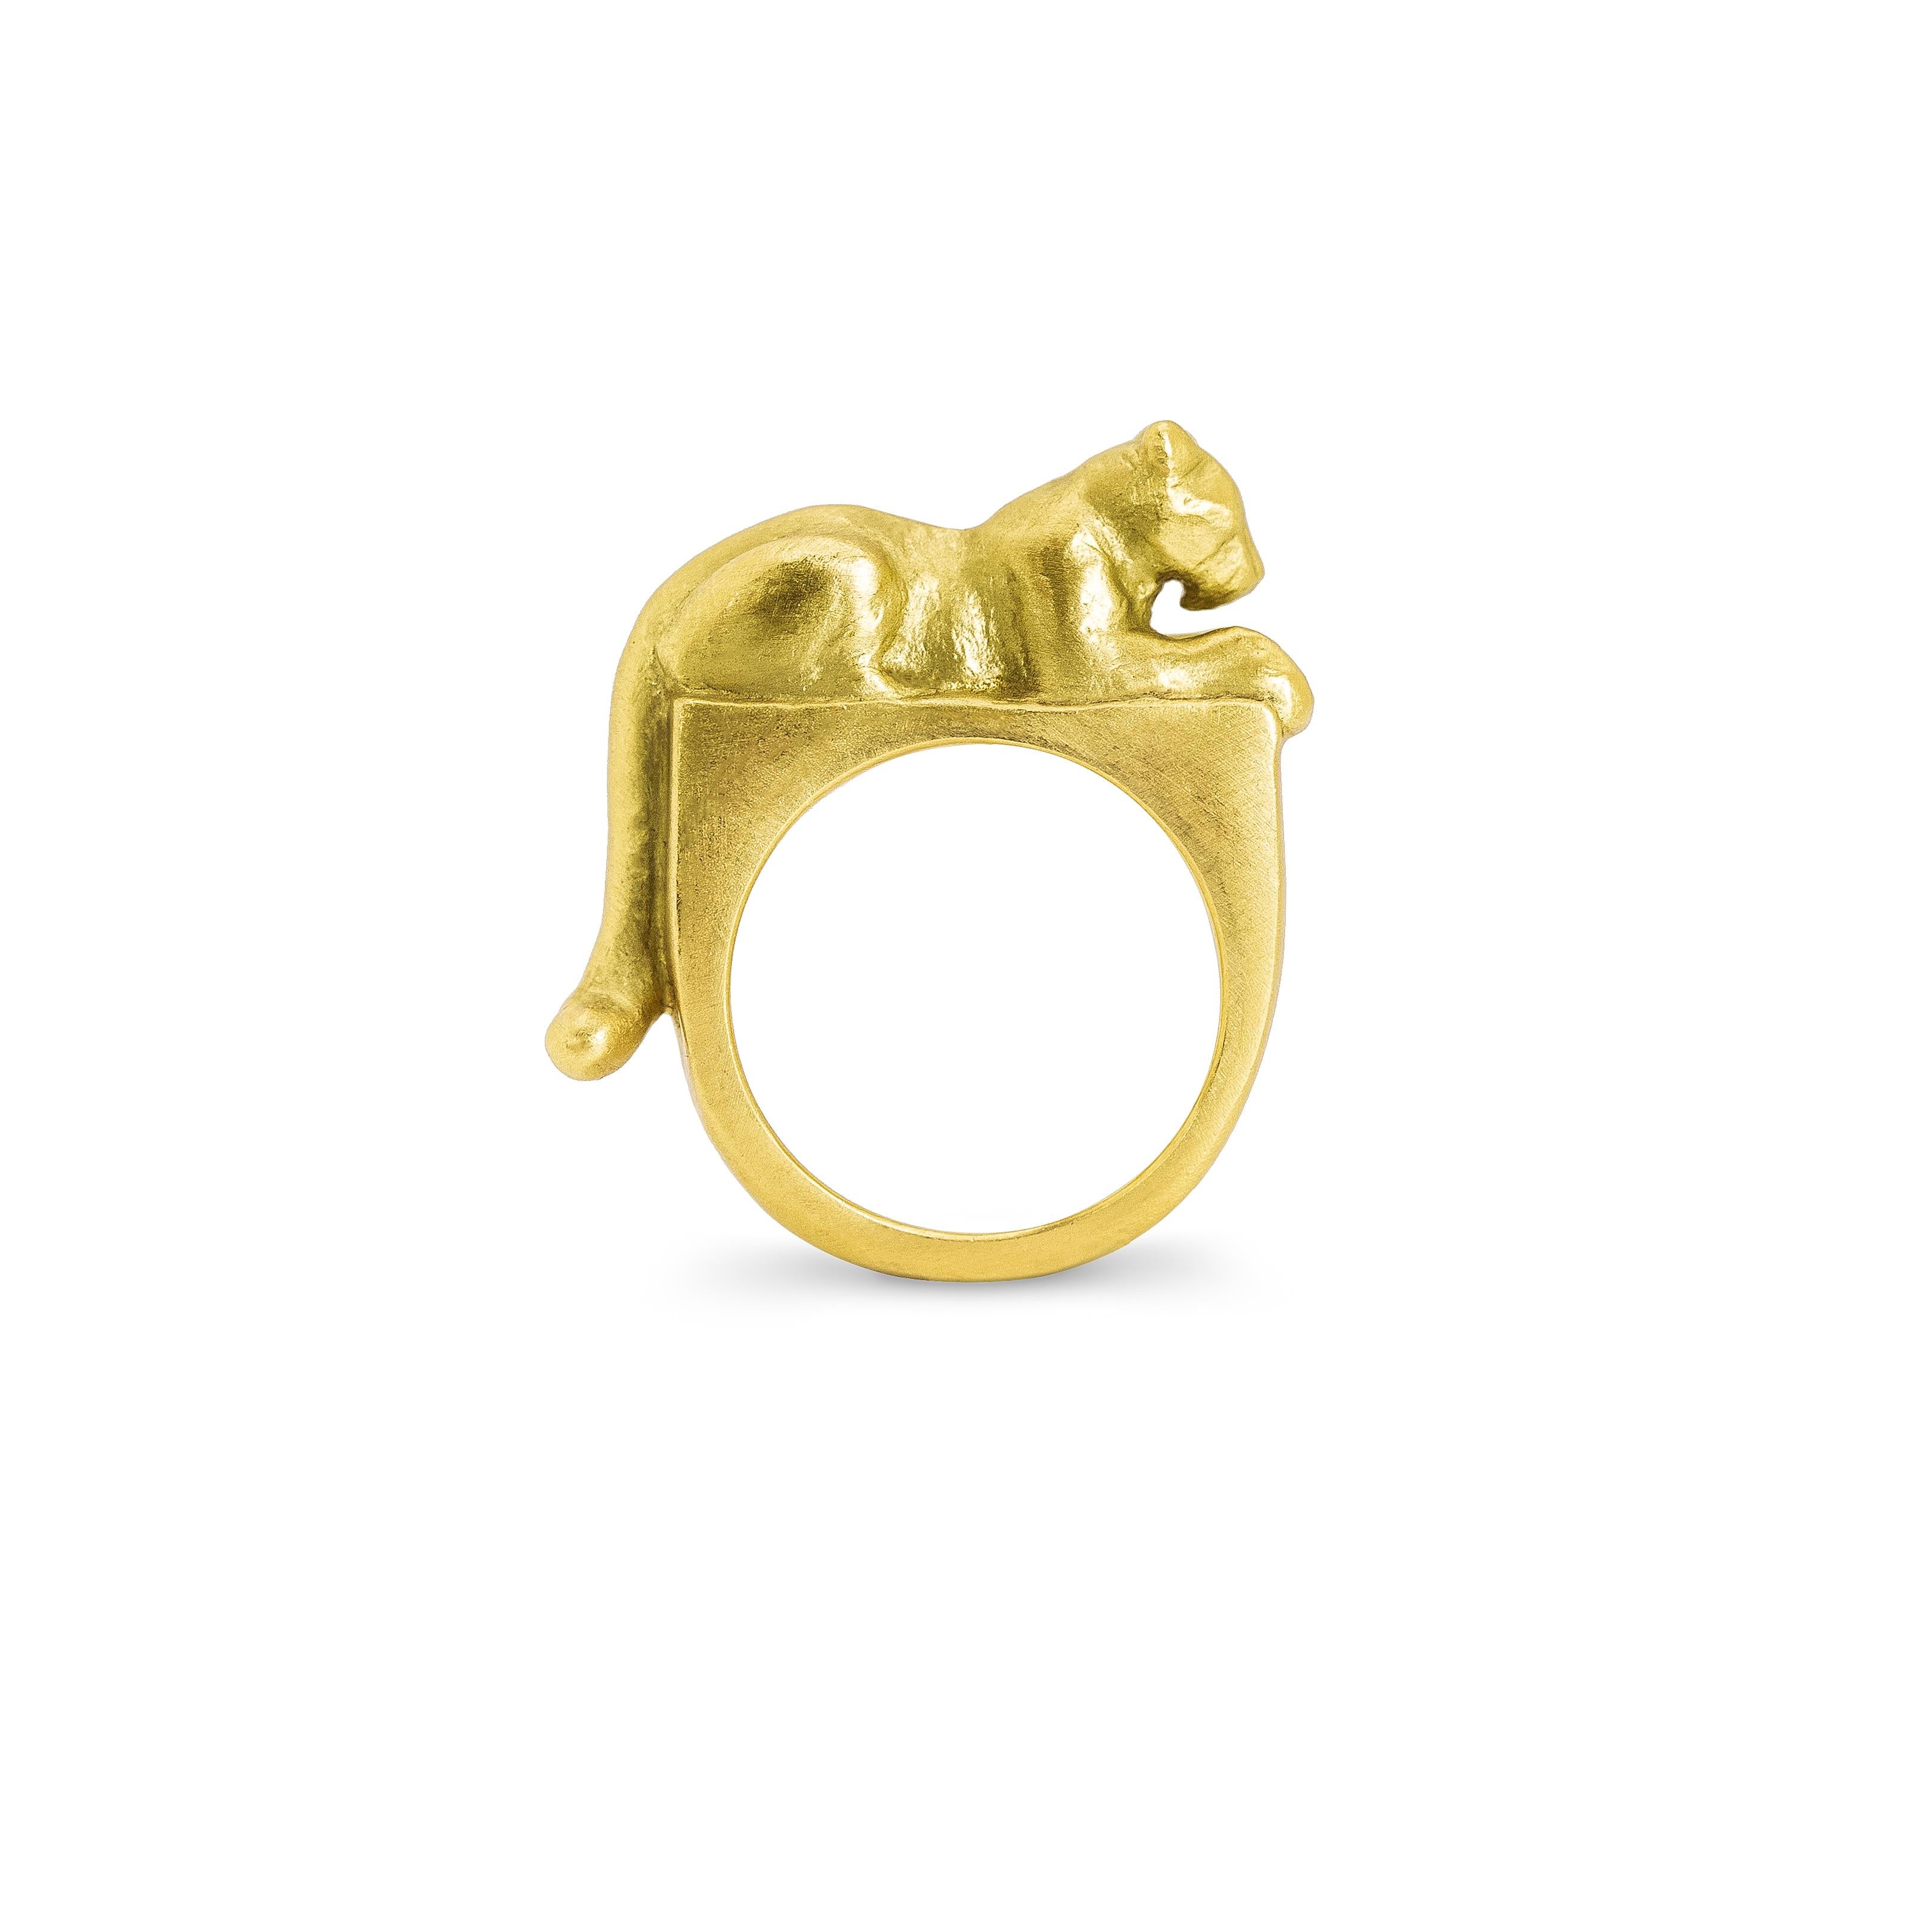 This heirloom-quality collectible will have you roaring with delight! Handcrafted in 18K gold, this chic ring is a true statement piece that will elevate any outfit. With its bold and timeless design, it's the perfect way to add some feline flair to